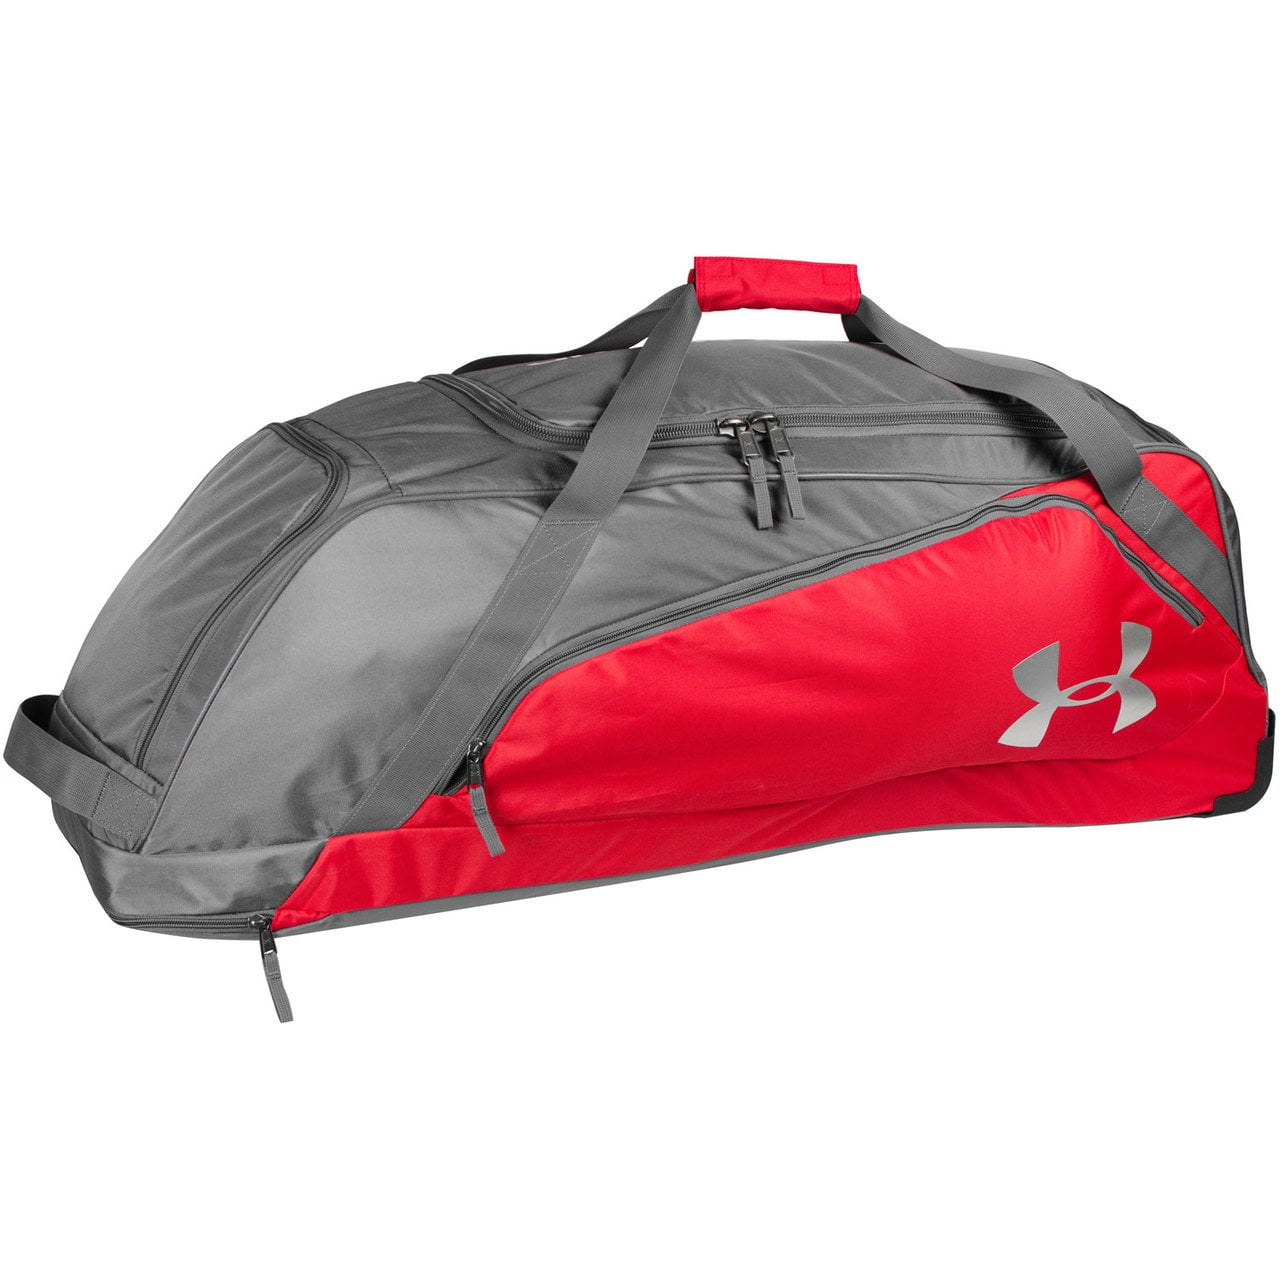 Details about   Under Armour Storm Lacrosse LAX Travel Bag 44” x 7” x 12” Red 